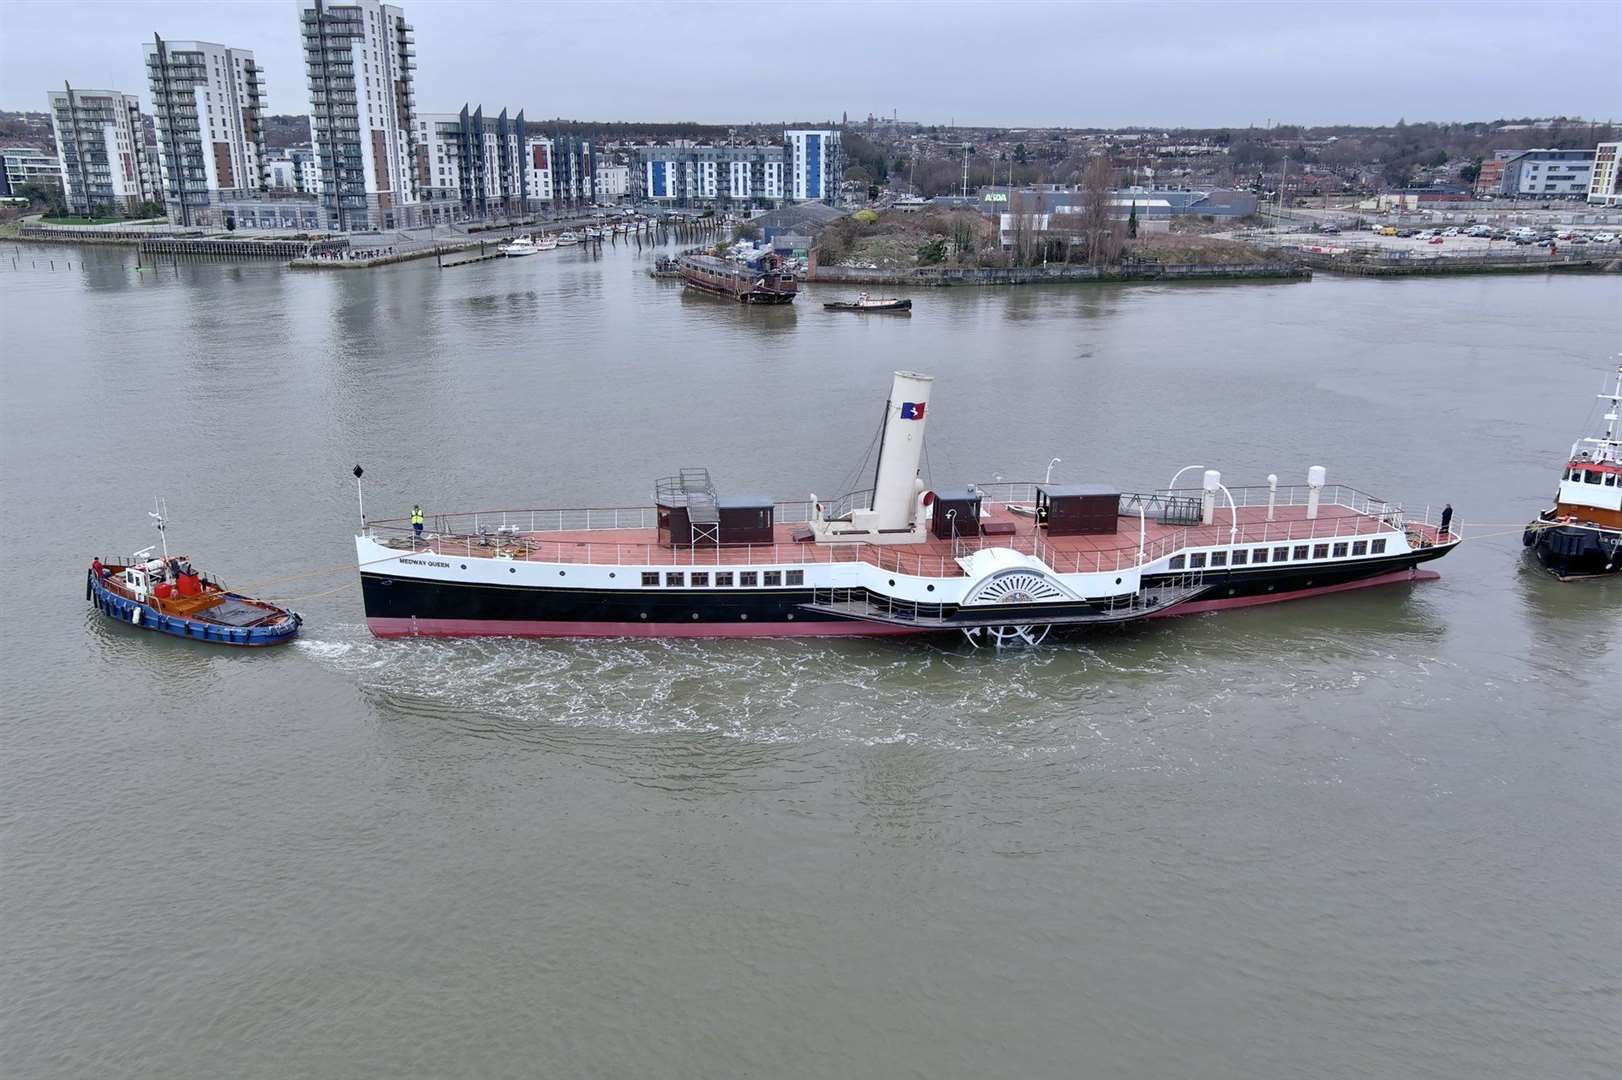 The Medway Queen returns to her base in Gillingham following her refit in Thanet Picture: Geoff Watkins - Aerial Imaging South East